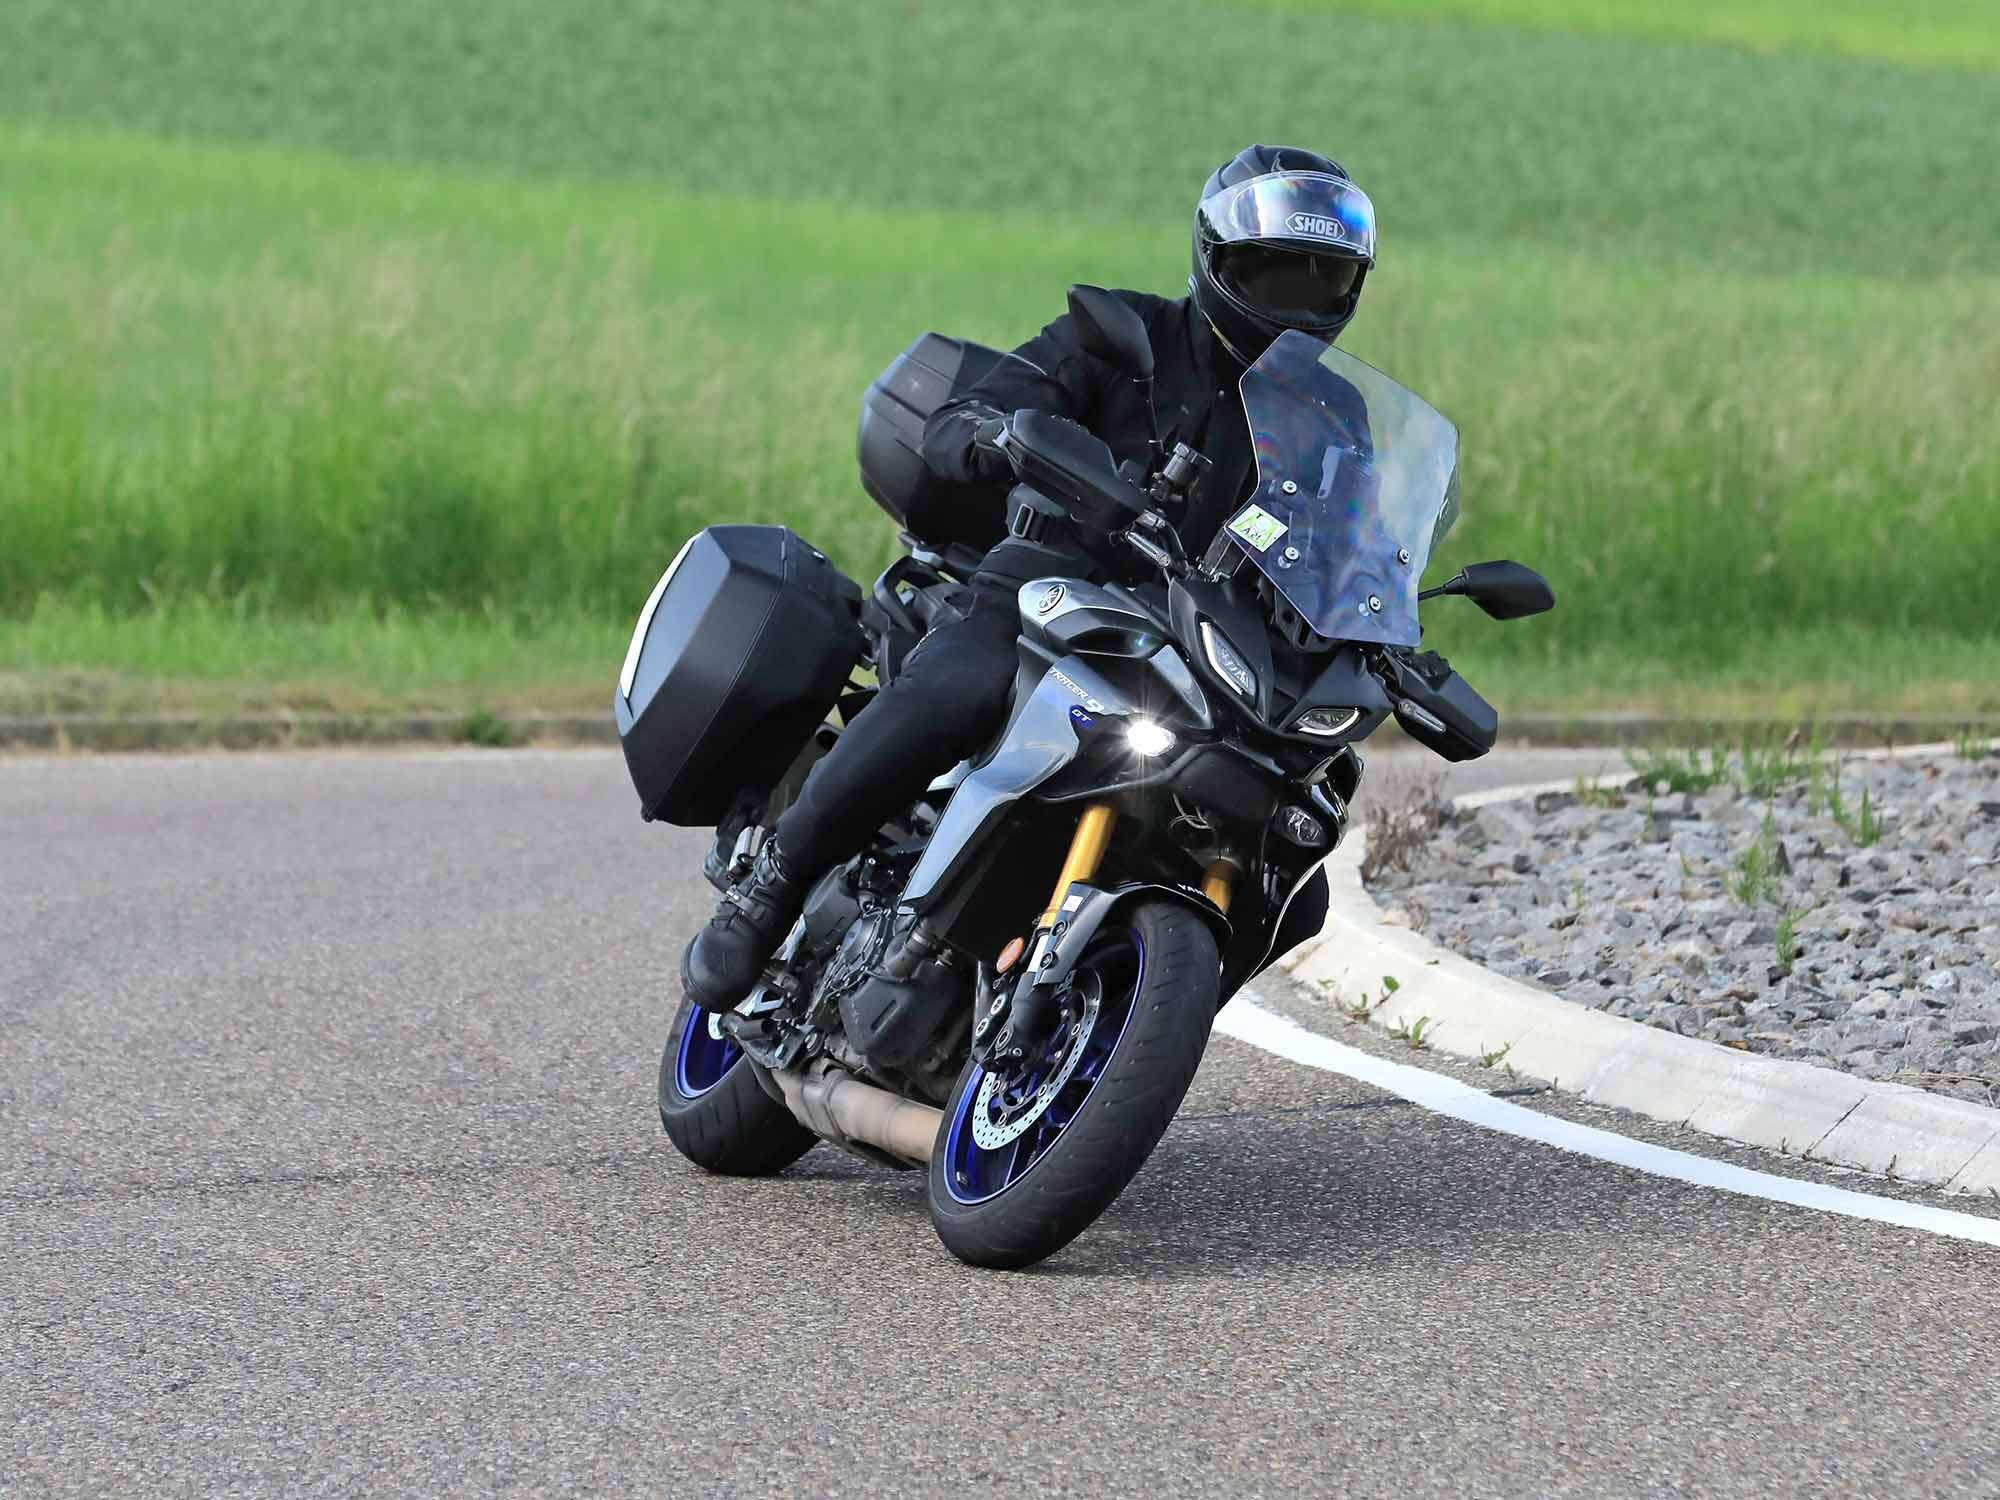 Spy shots obtained earlier in the year show the new radar system as equipped on Yamaha’s Tracer 9 GT. Now, patents leave no doubt that it’s on the way.